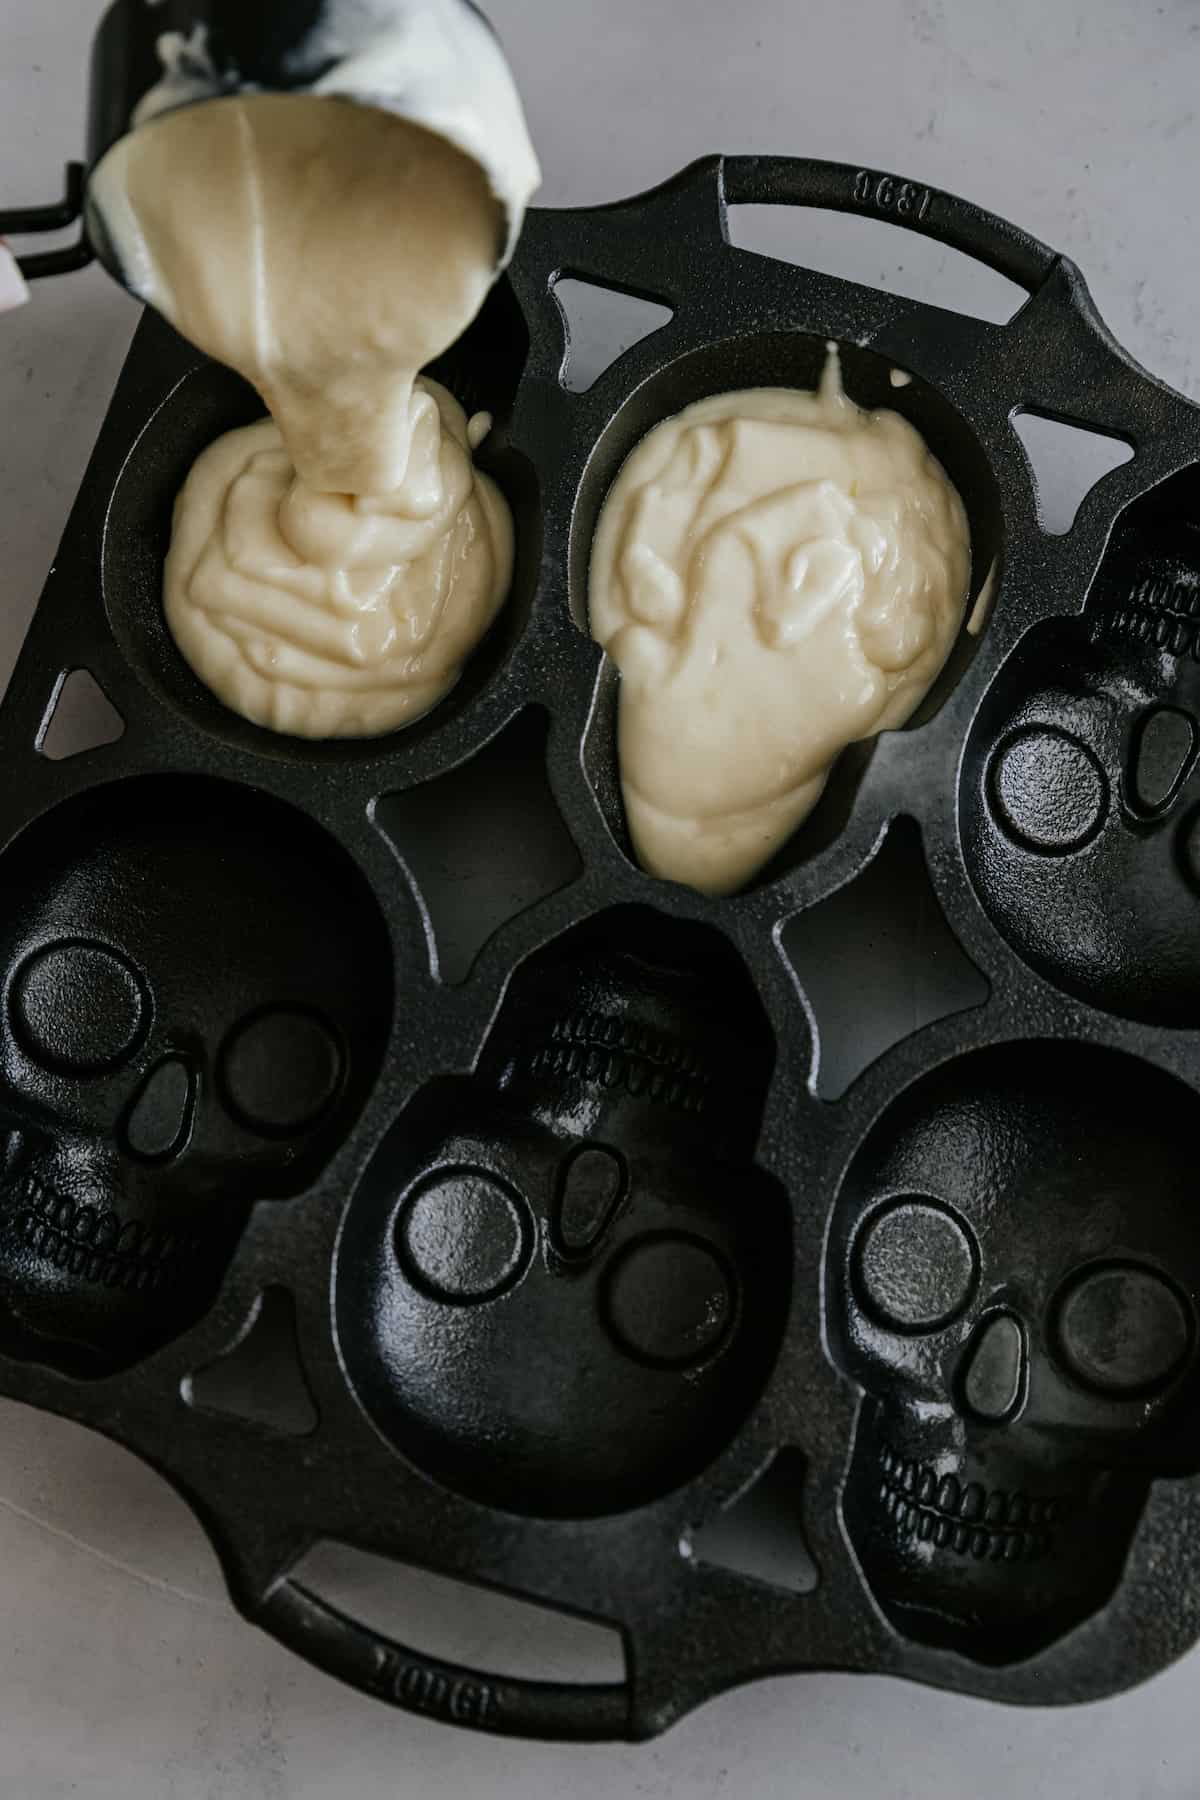 using a disher to pour batter into the skull cake pan mold.